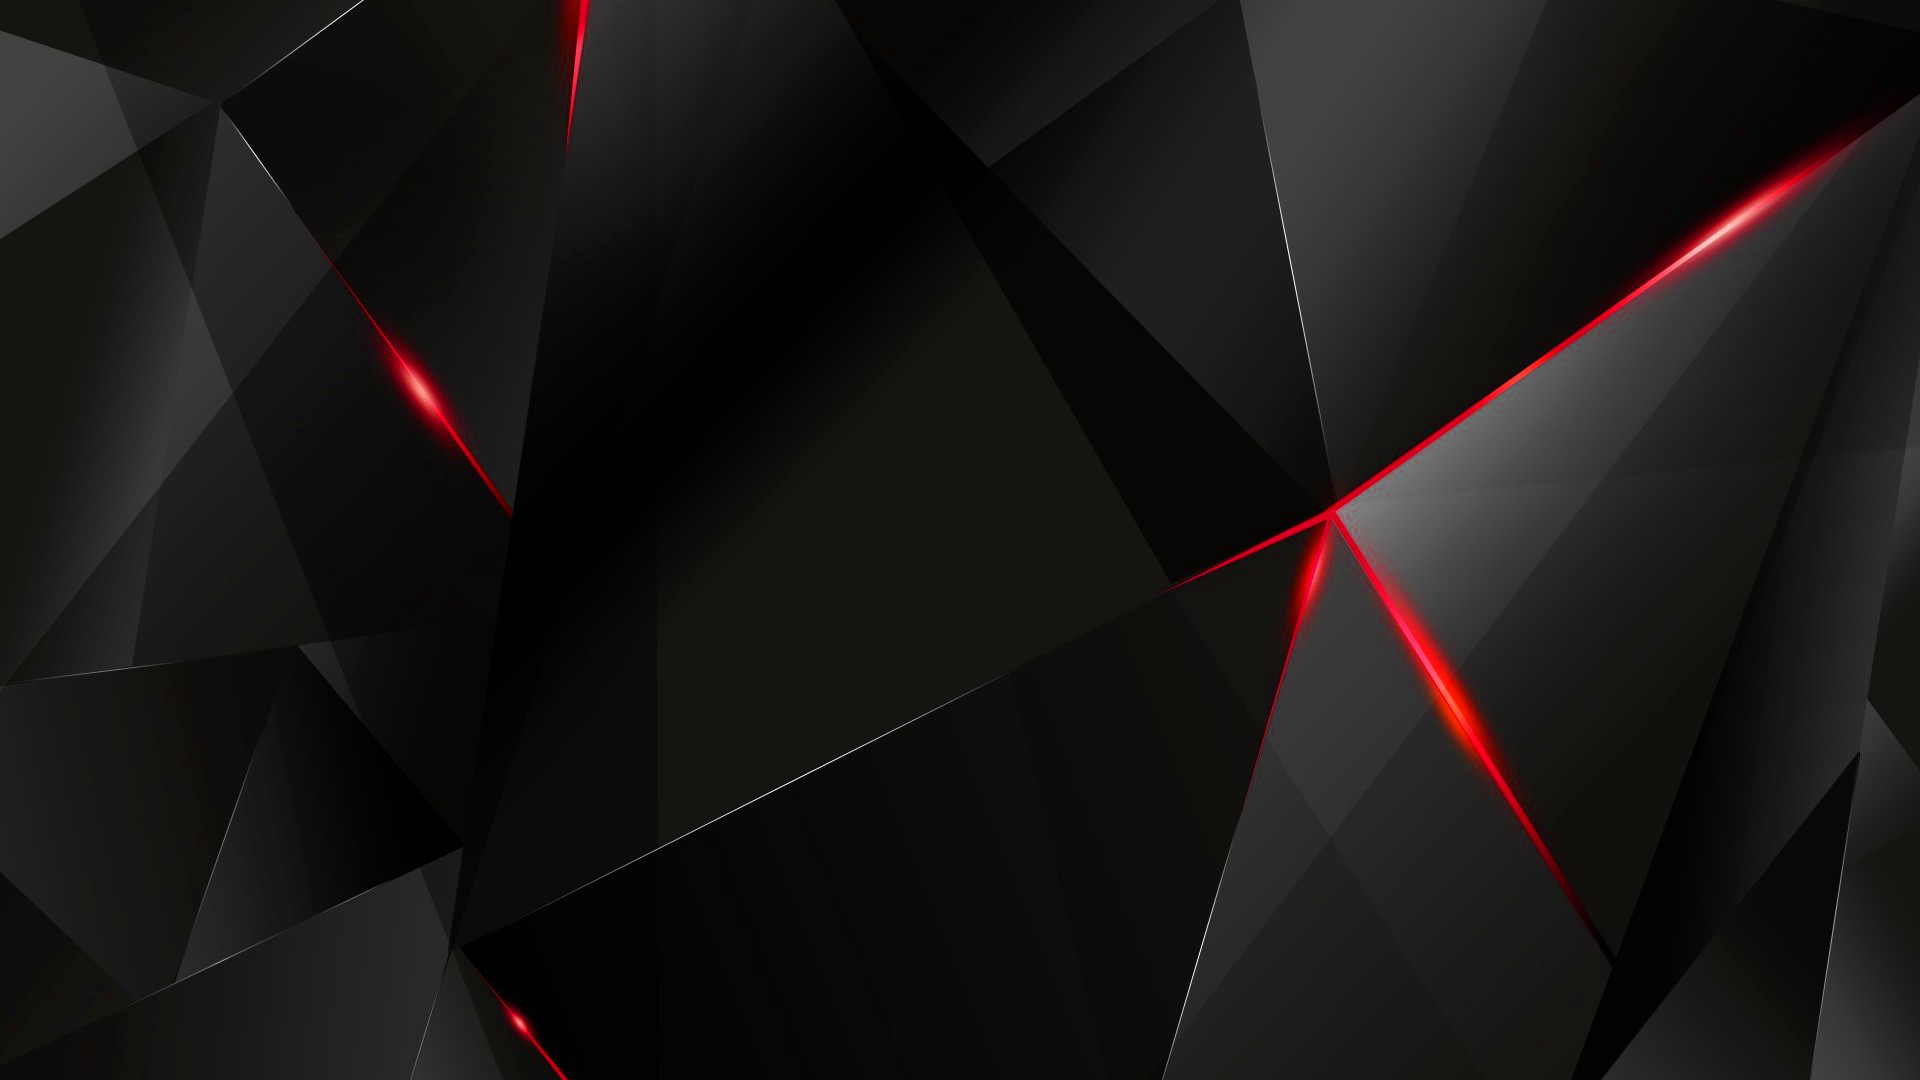 1920x1080 ... Wallpapers - Red Abstract Polygons (Black BG) (RE) by kaminohunter